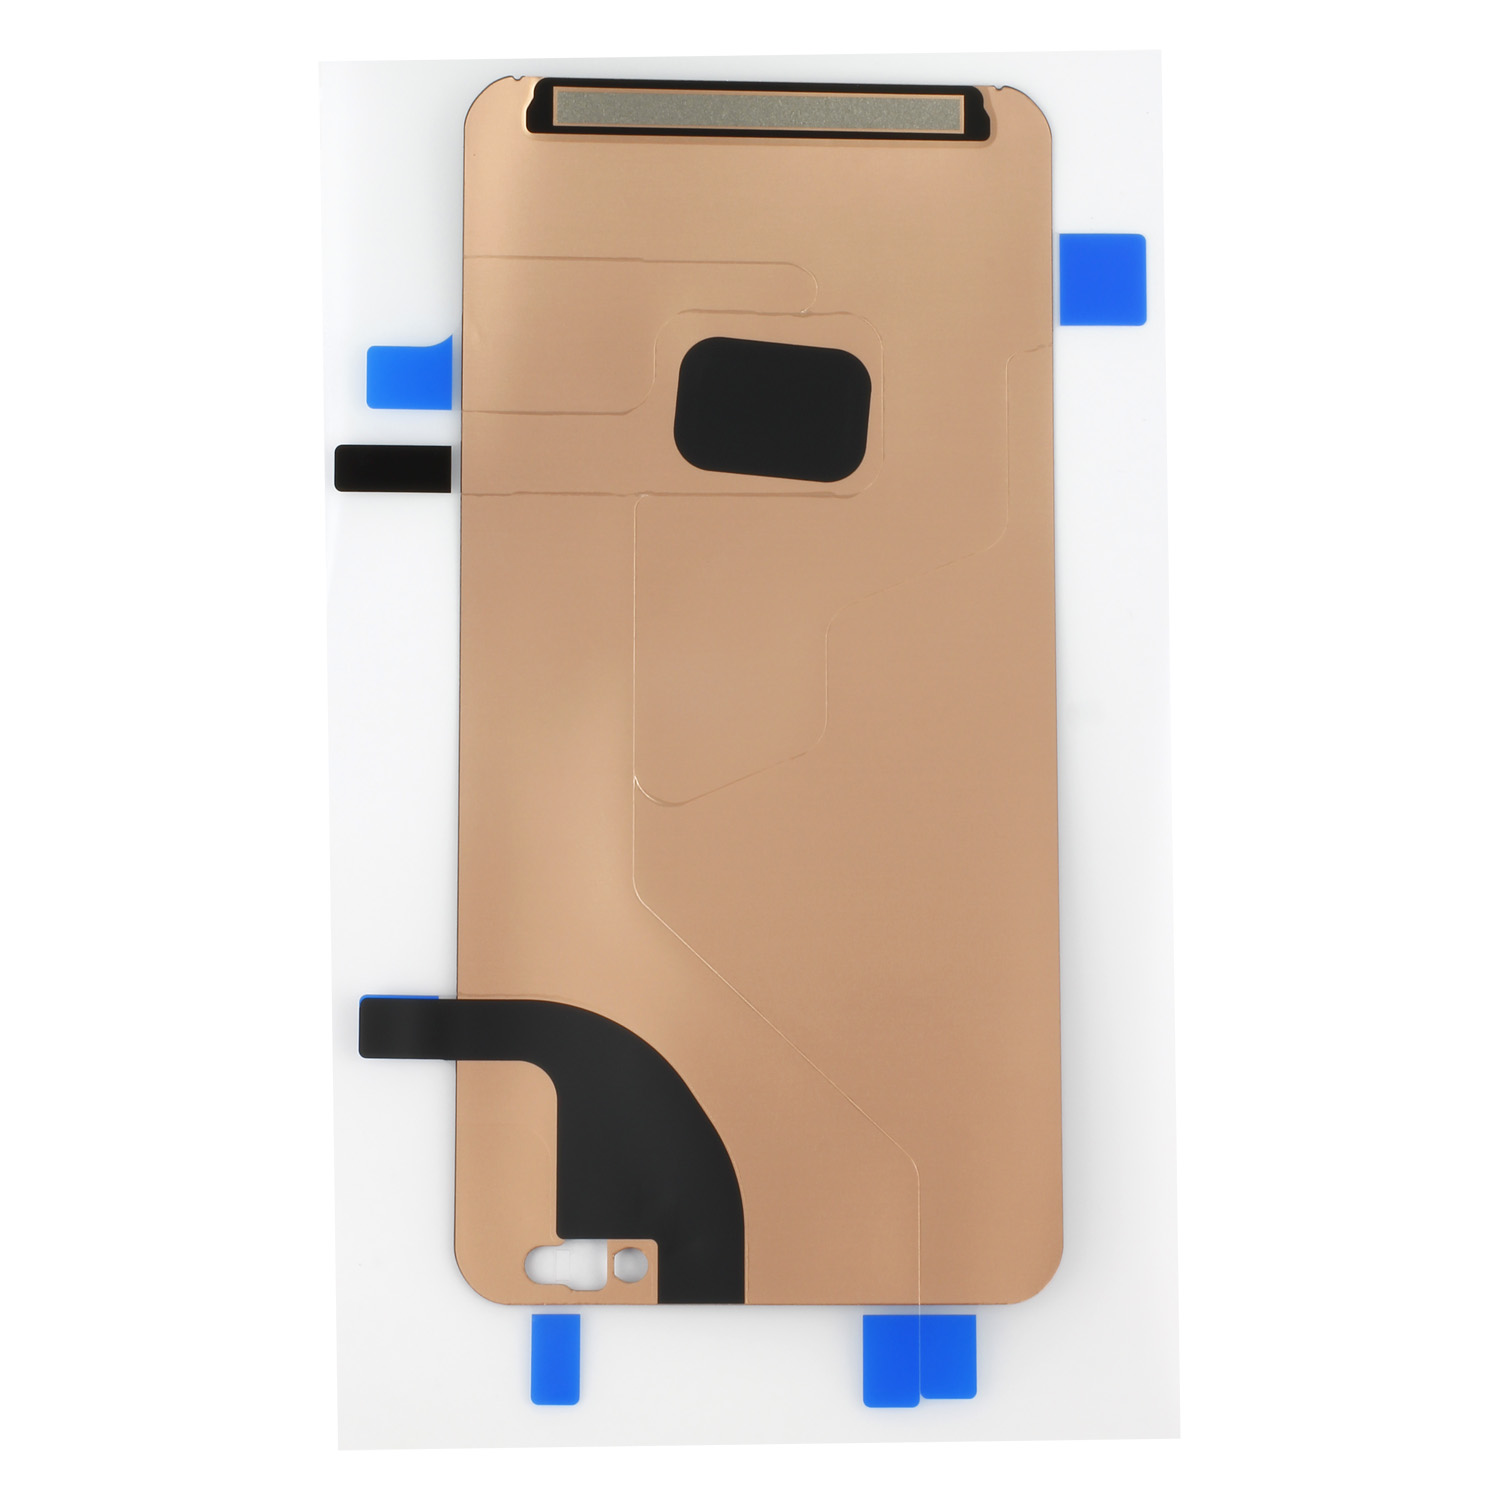 LCD Backside Adhesive Stripe compatible fpr Huawei Mate 40 Pro (NOH-NX9)